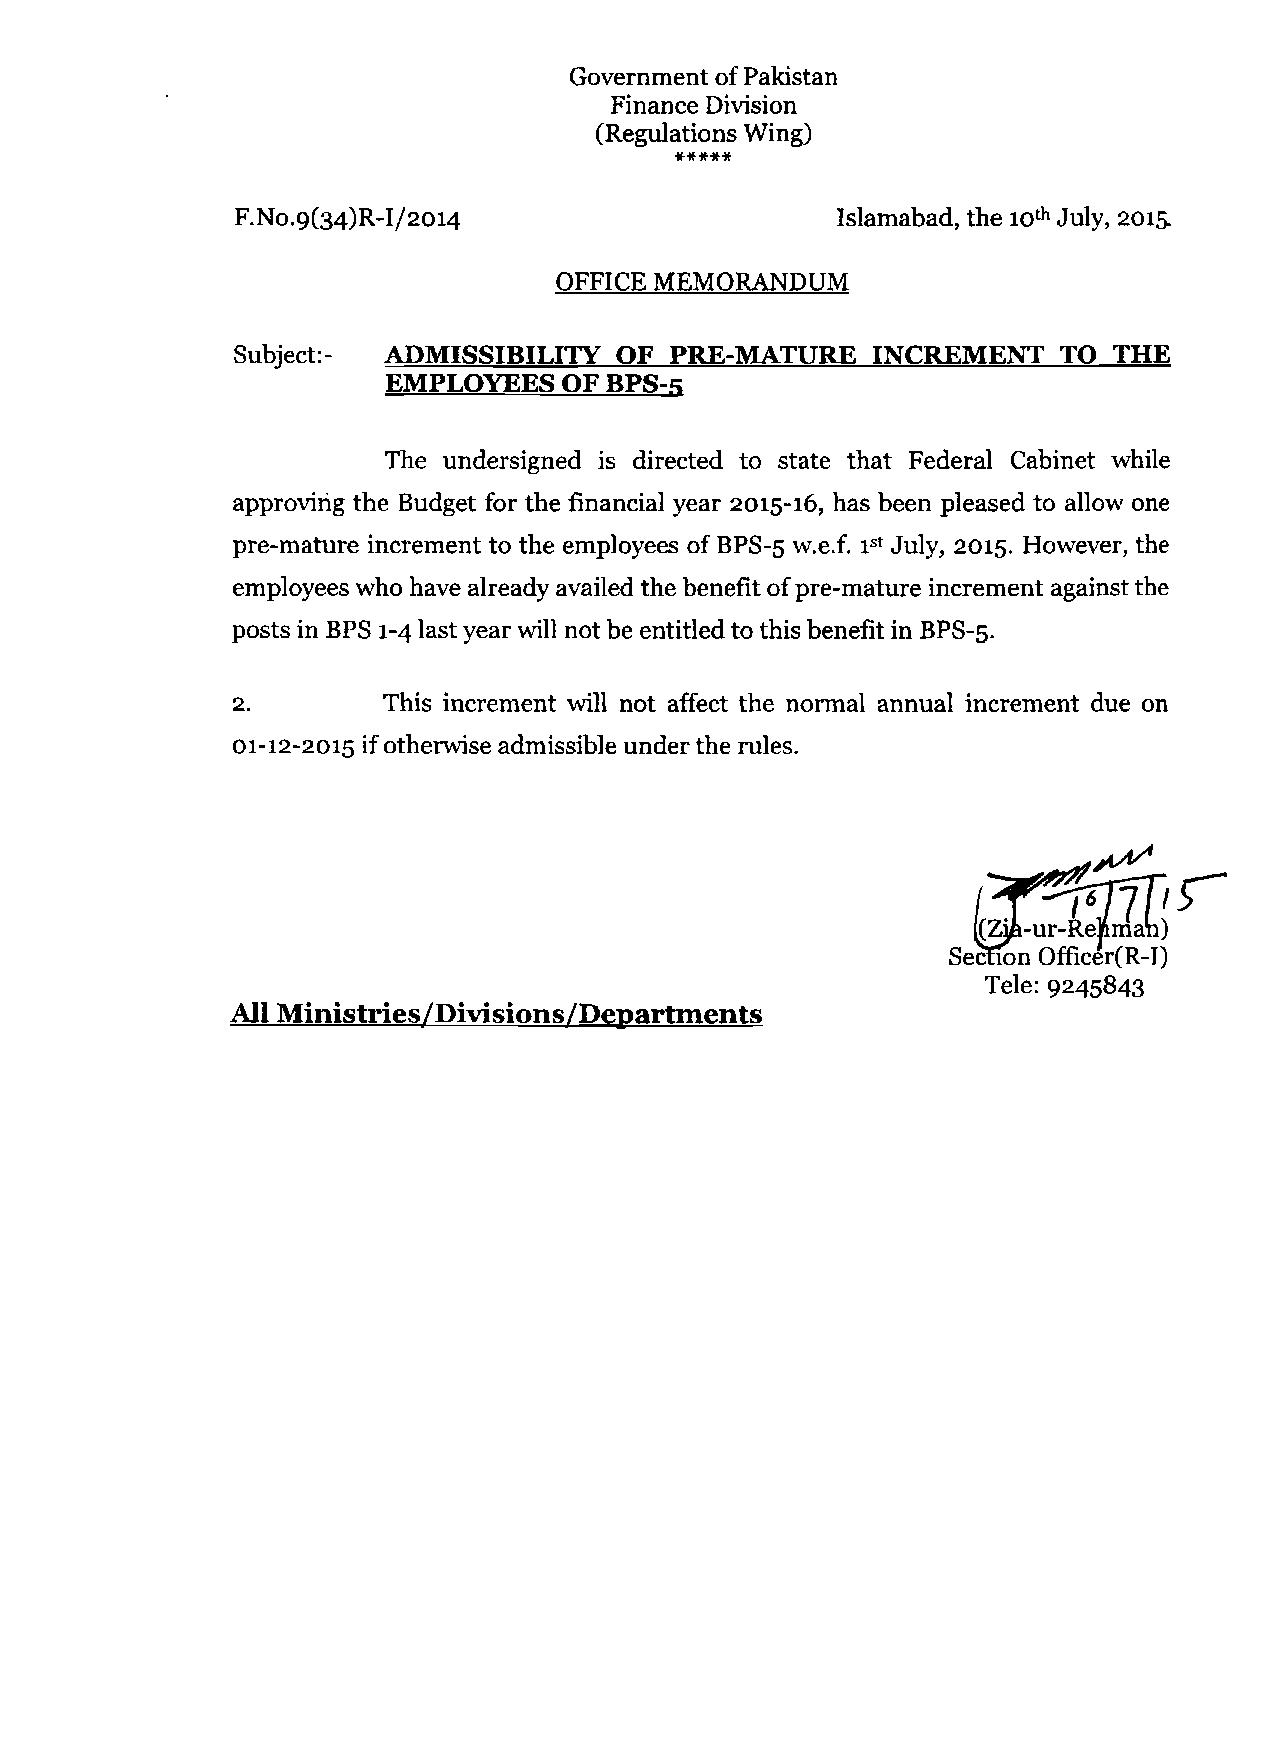 ADMISSIBILITY OF PREMATURE INCREMENT TO EMPLOYEES OF BPS-5